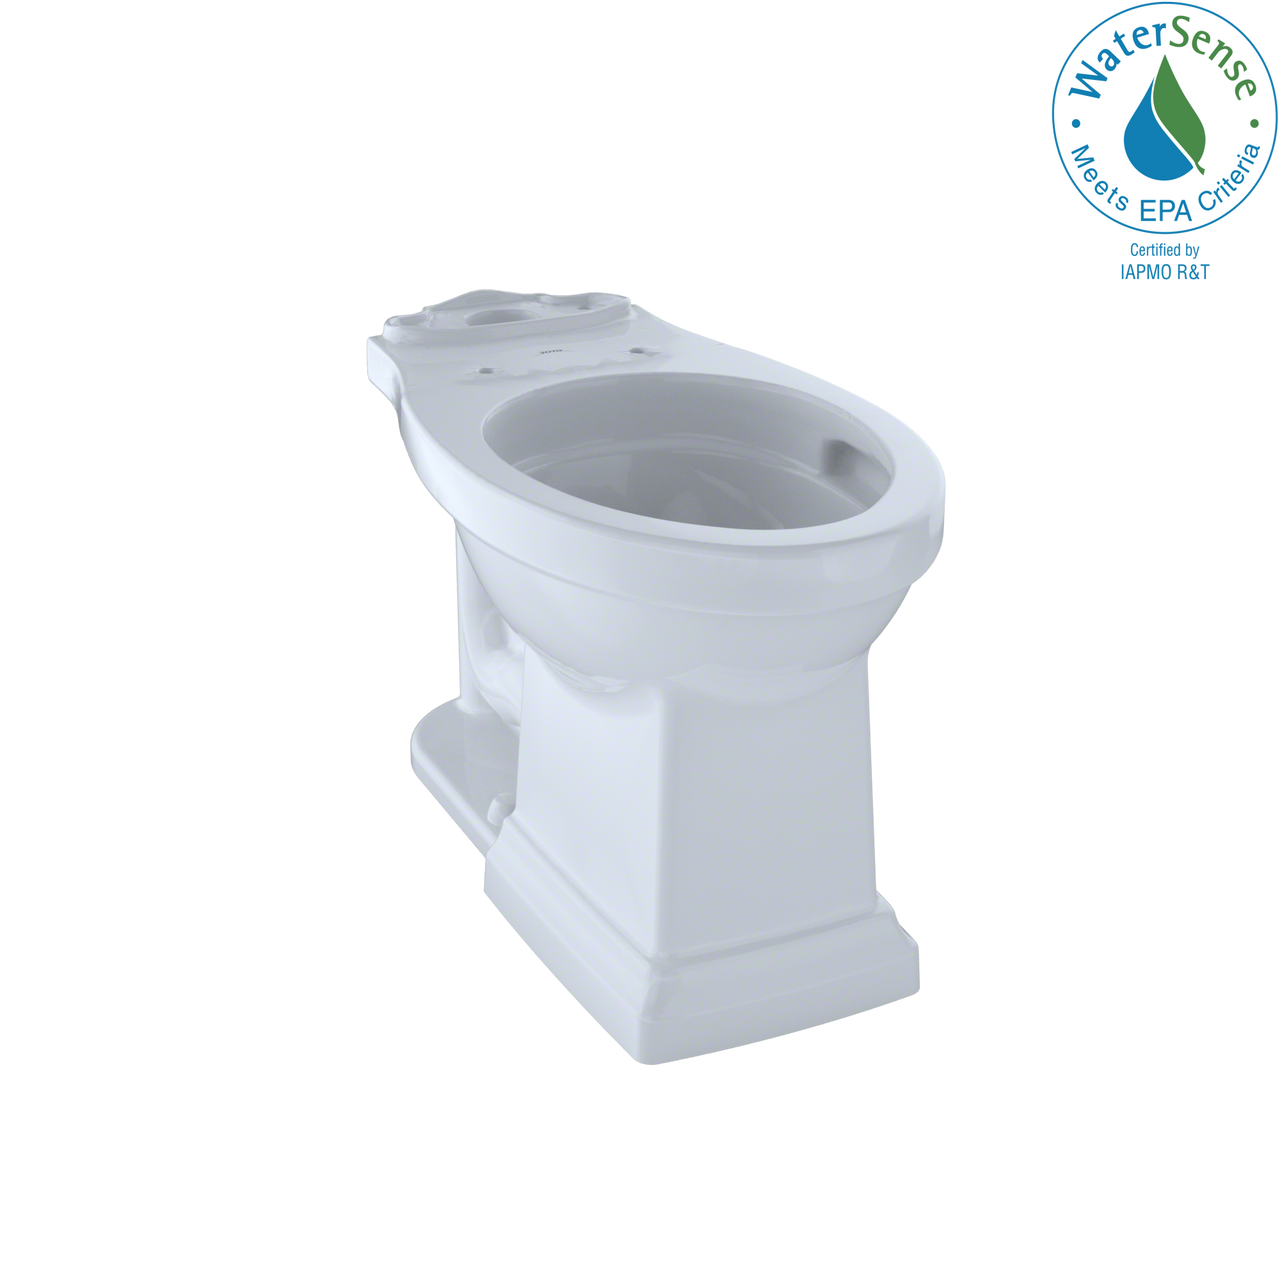 TOTO Promenade II Universal Height Toilet Bowl with CeFiONtect,  - C404CUFG#01 - BNGBath